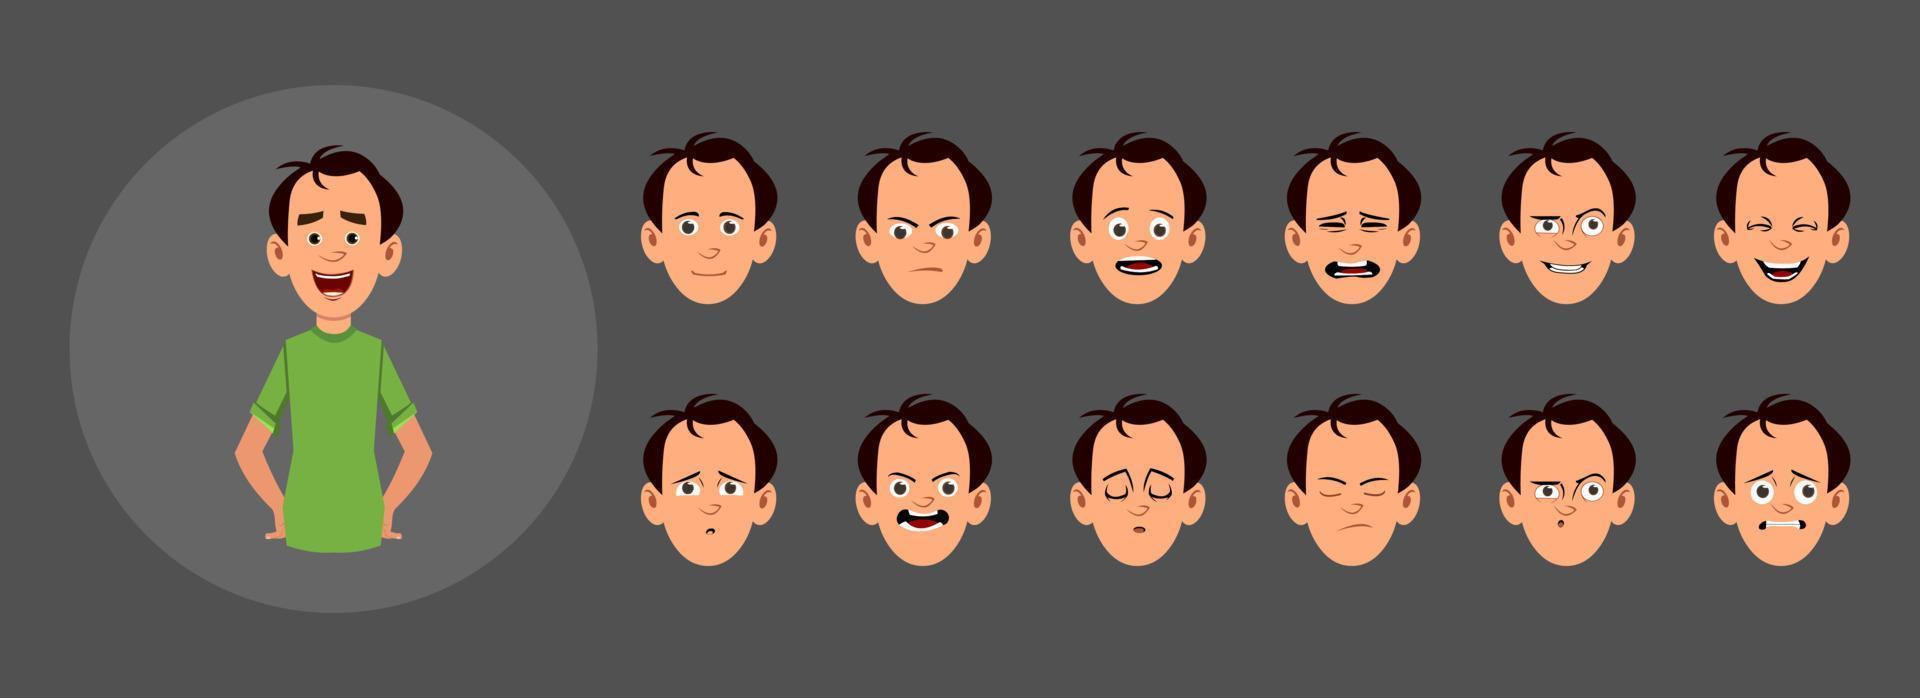 People with different facial emotions.  Different facial emotions for custom animation, motion or design. vector